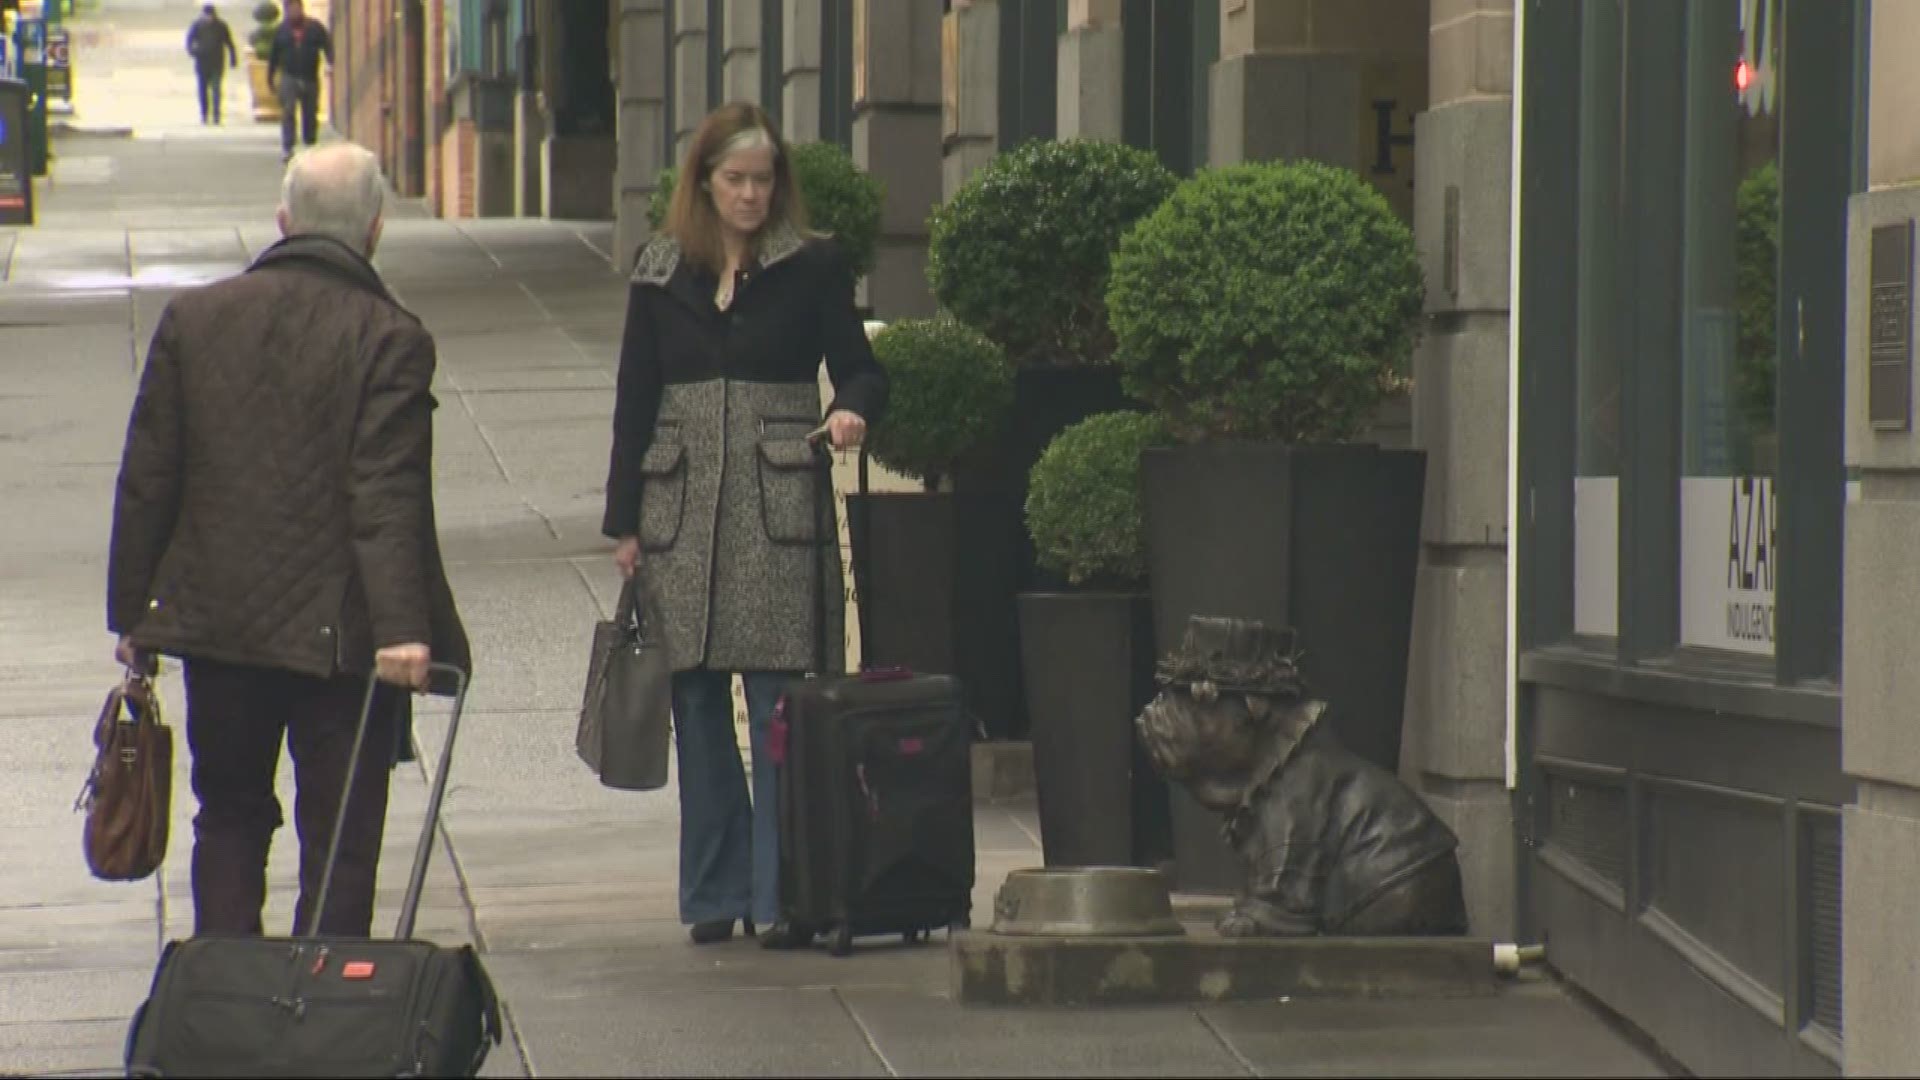 More Portland hotels are seeing guest cancelations due to concerns about coronavirus. A travel show was also postponed.